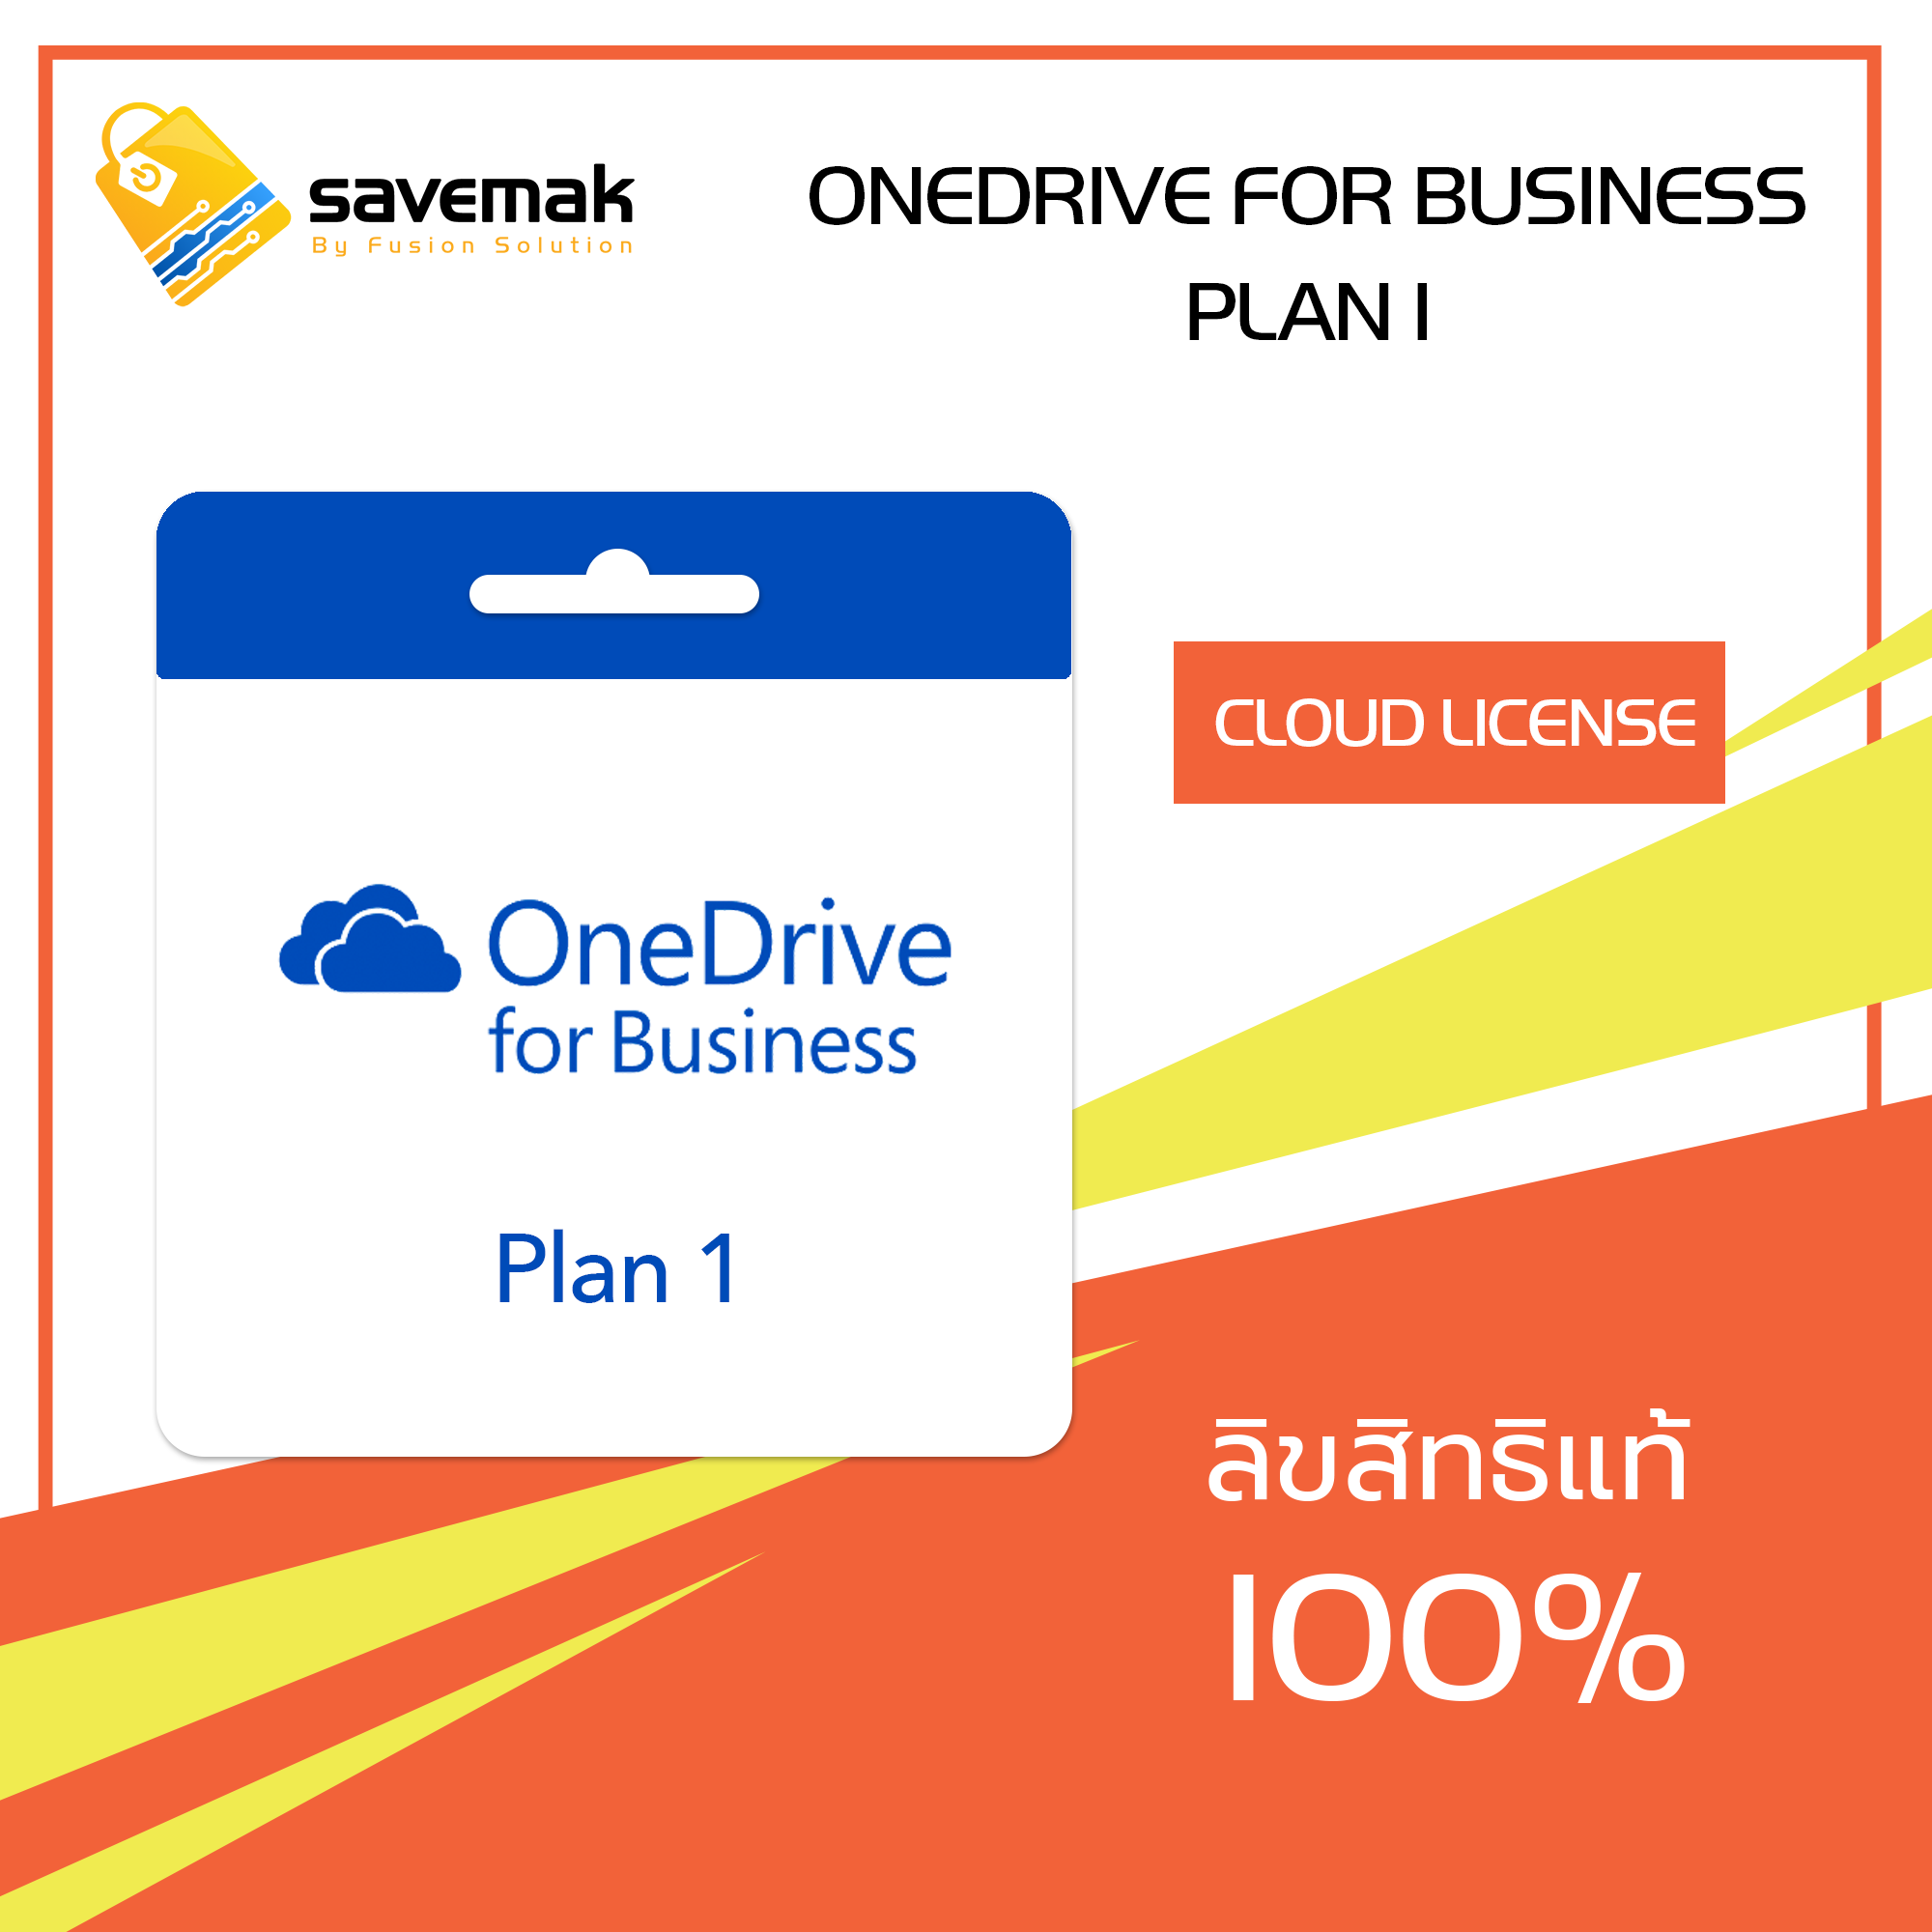 onedrive for business plan 1 price